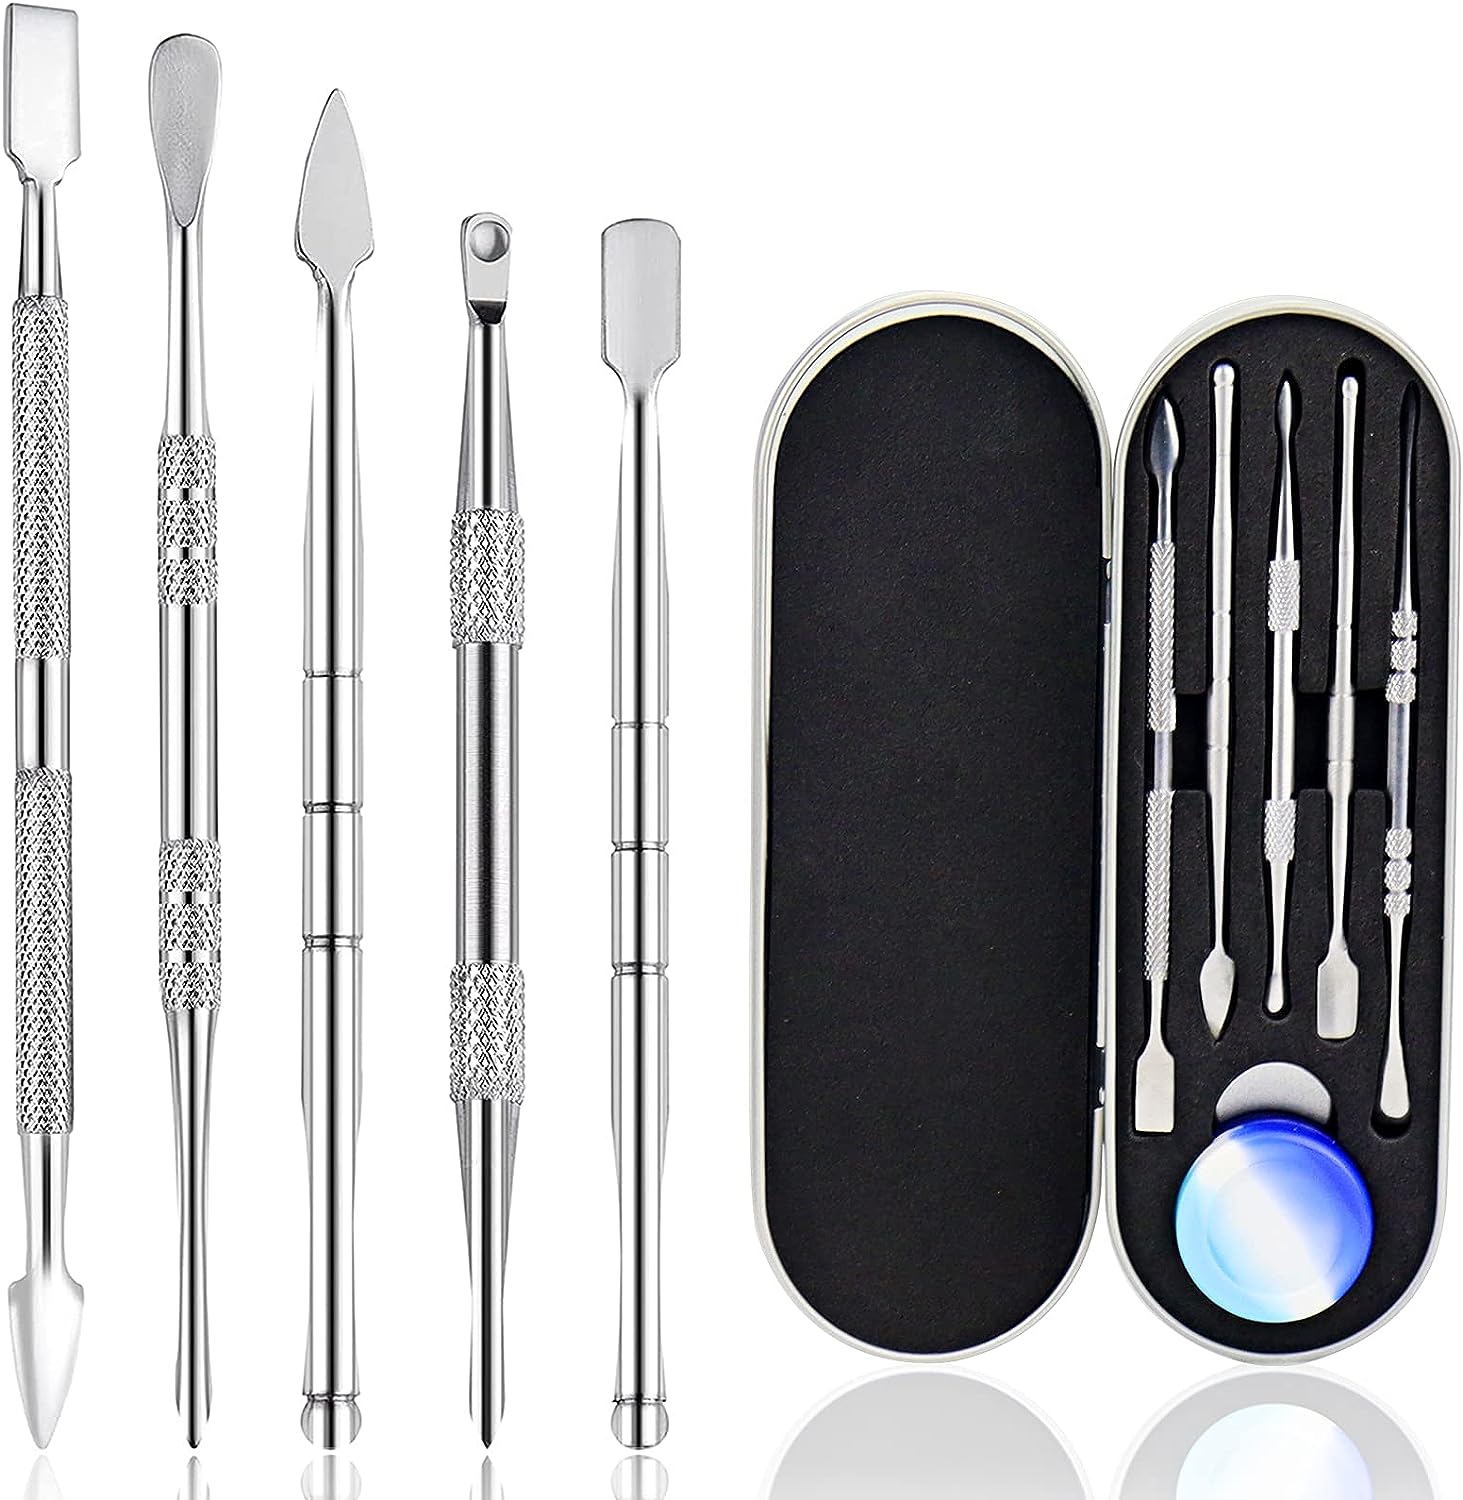 Wax Carving Tools Dab Stainless Steel Set with Metal Case for Jewellery,  Sculpting, Modeling, Scraping Mini 5 Pcs (Silver)